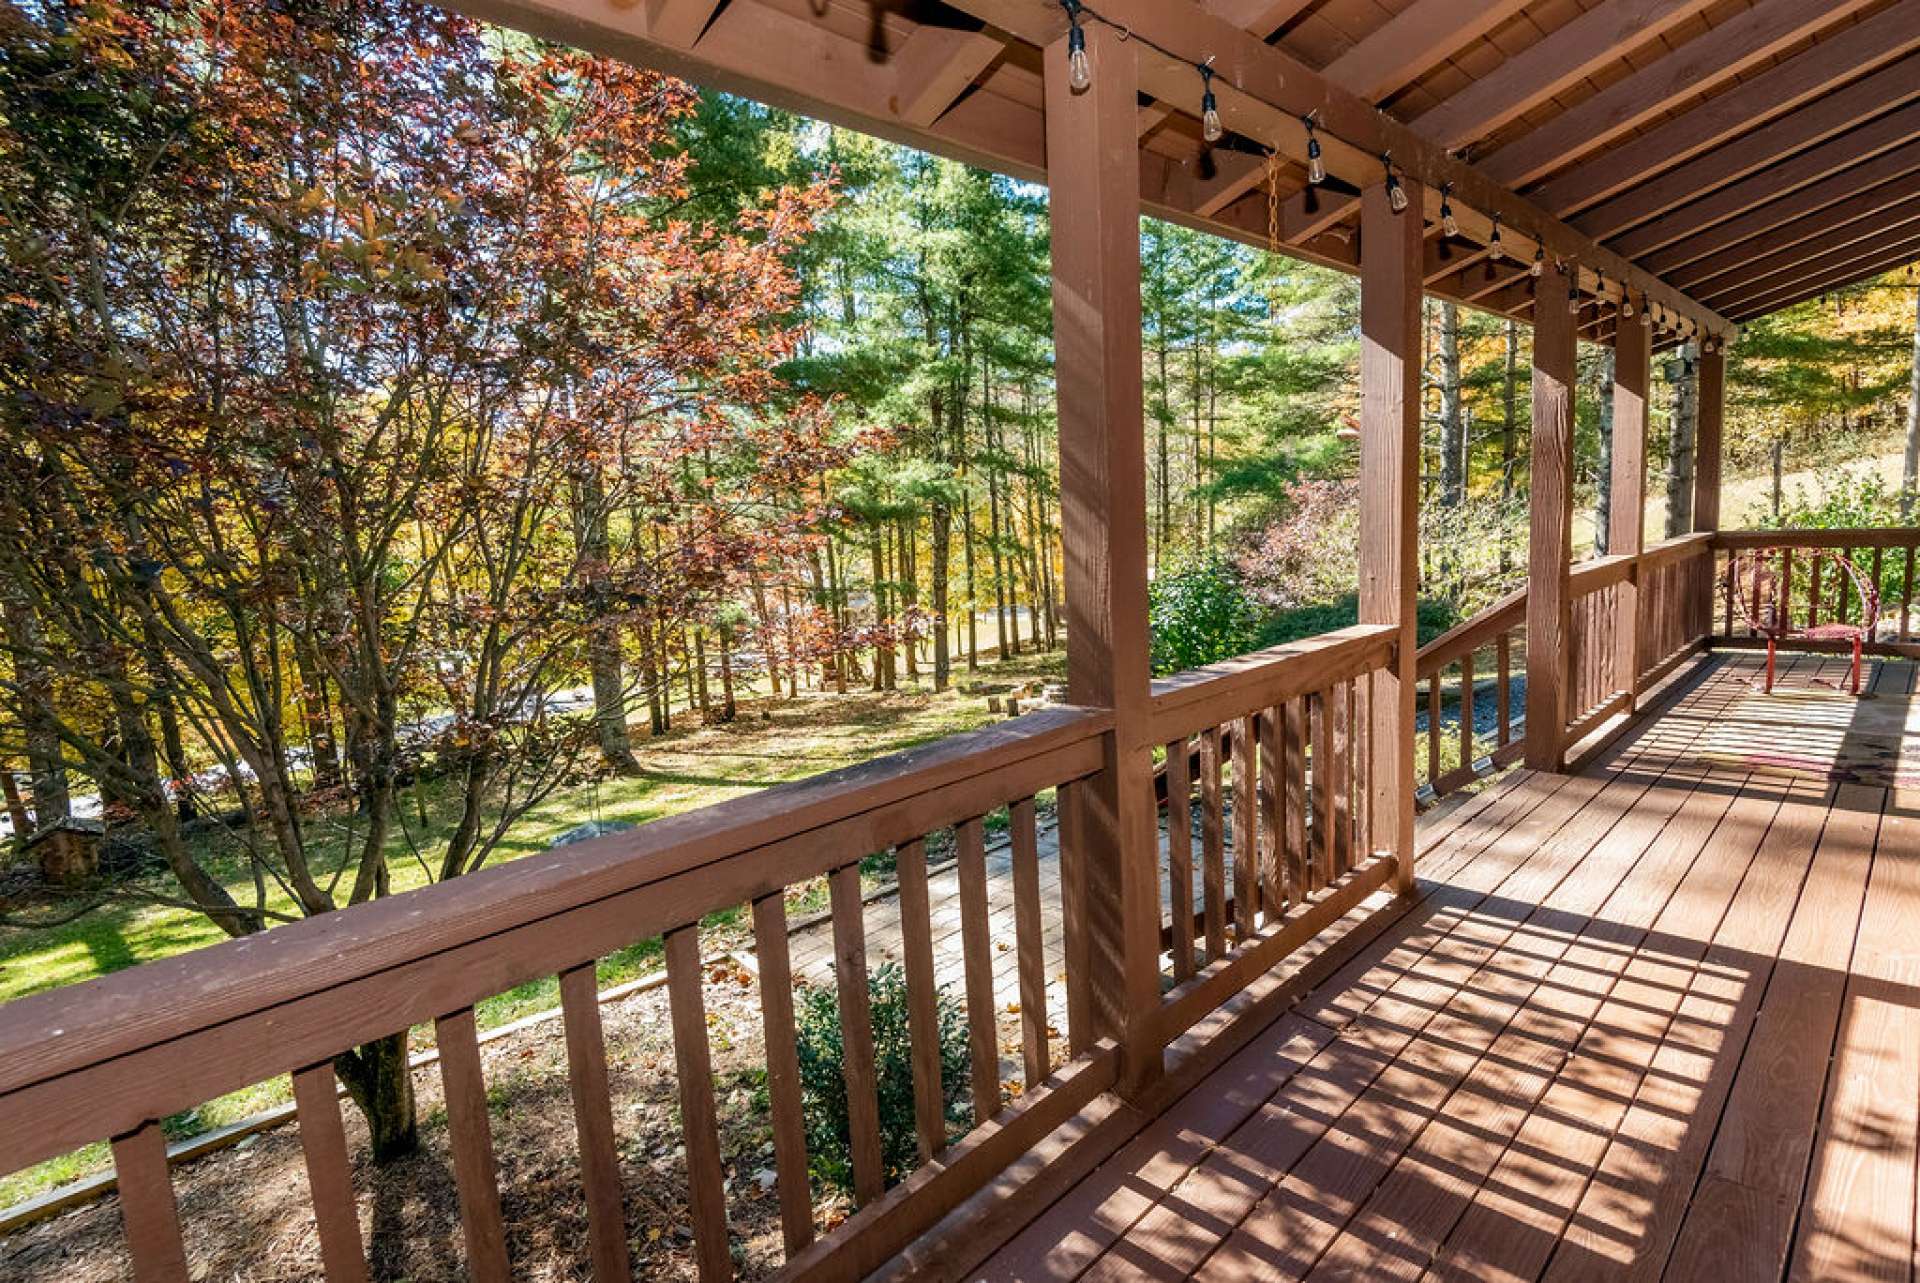 The covered front porch is an ideal space for entertaining friends or simply relaxing with the sounds of Nature.